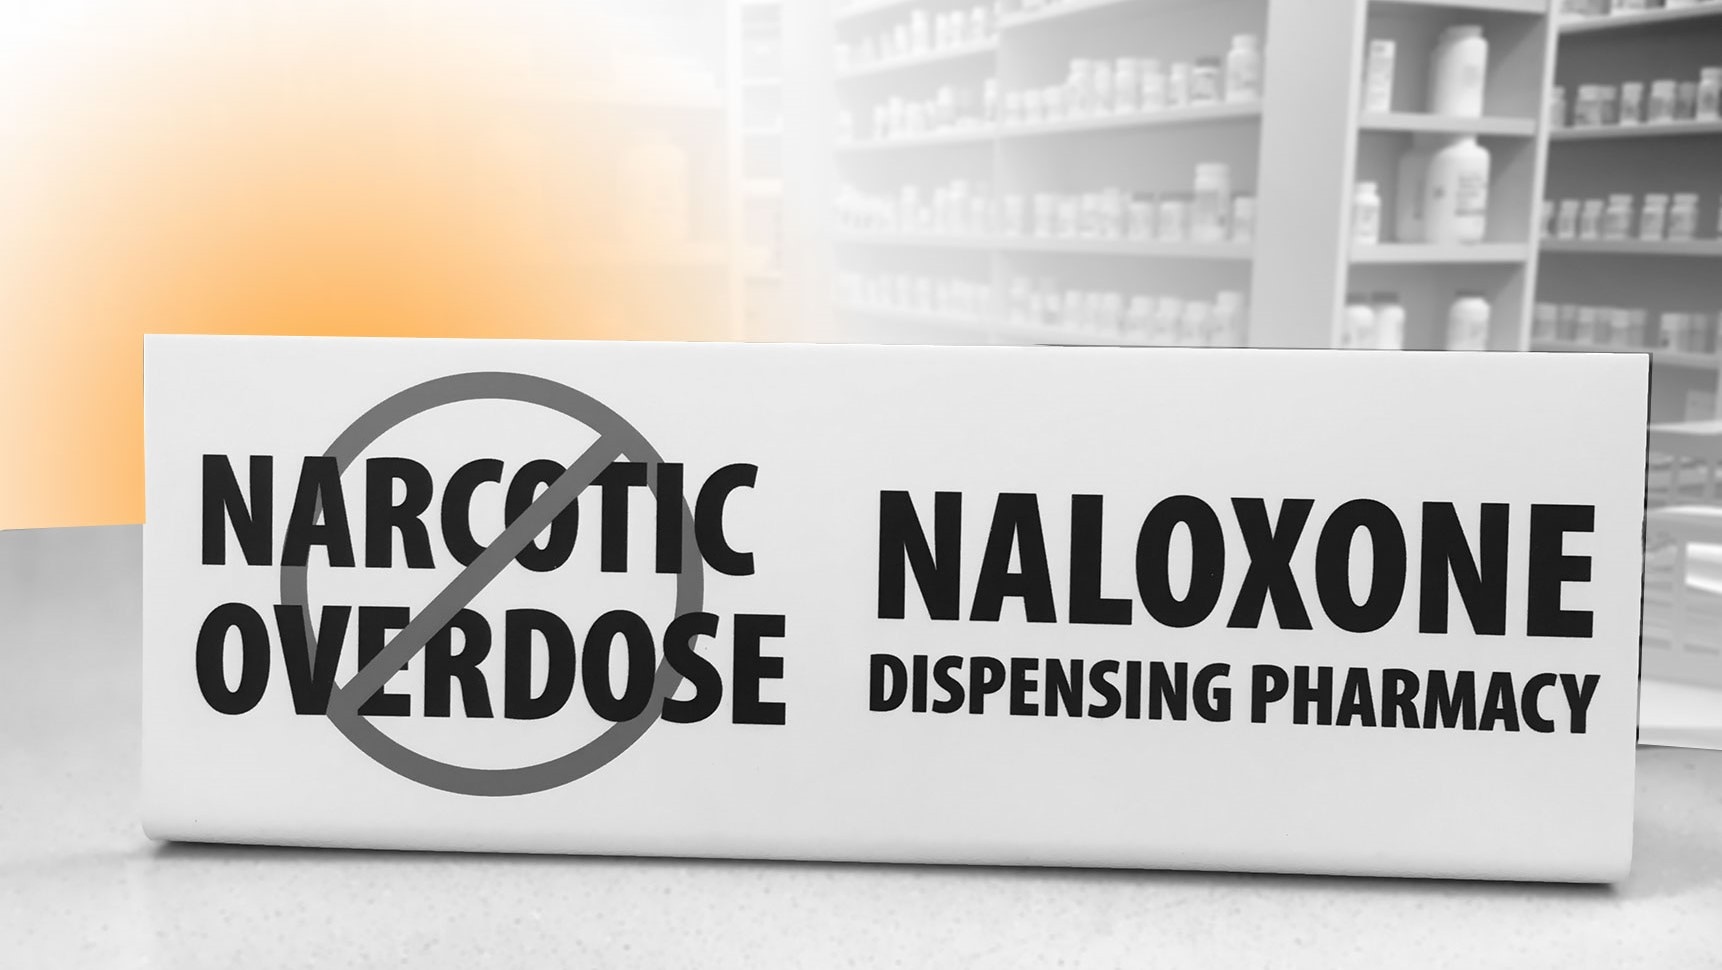 A pharmacy with a sign that says "Naloxone Dispensing Pharmacy"